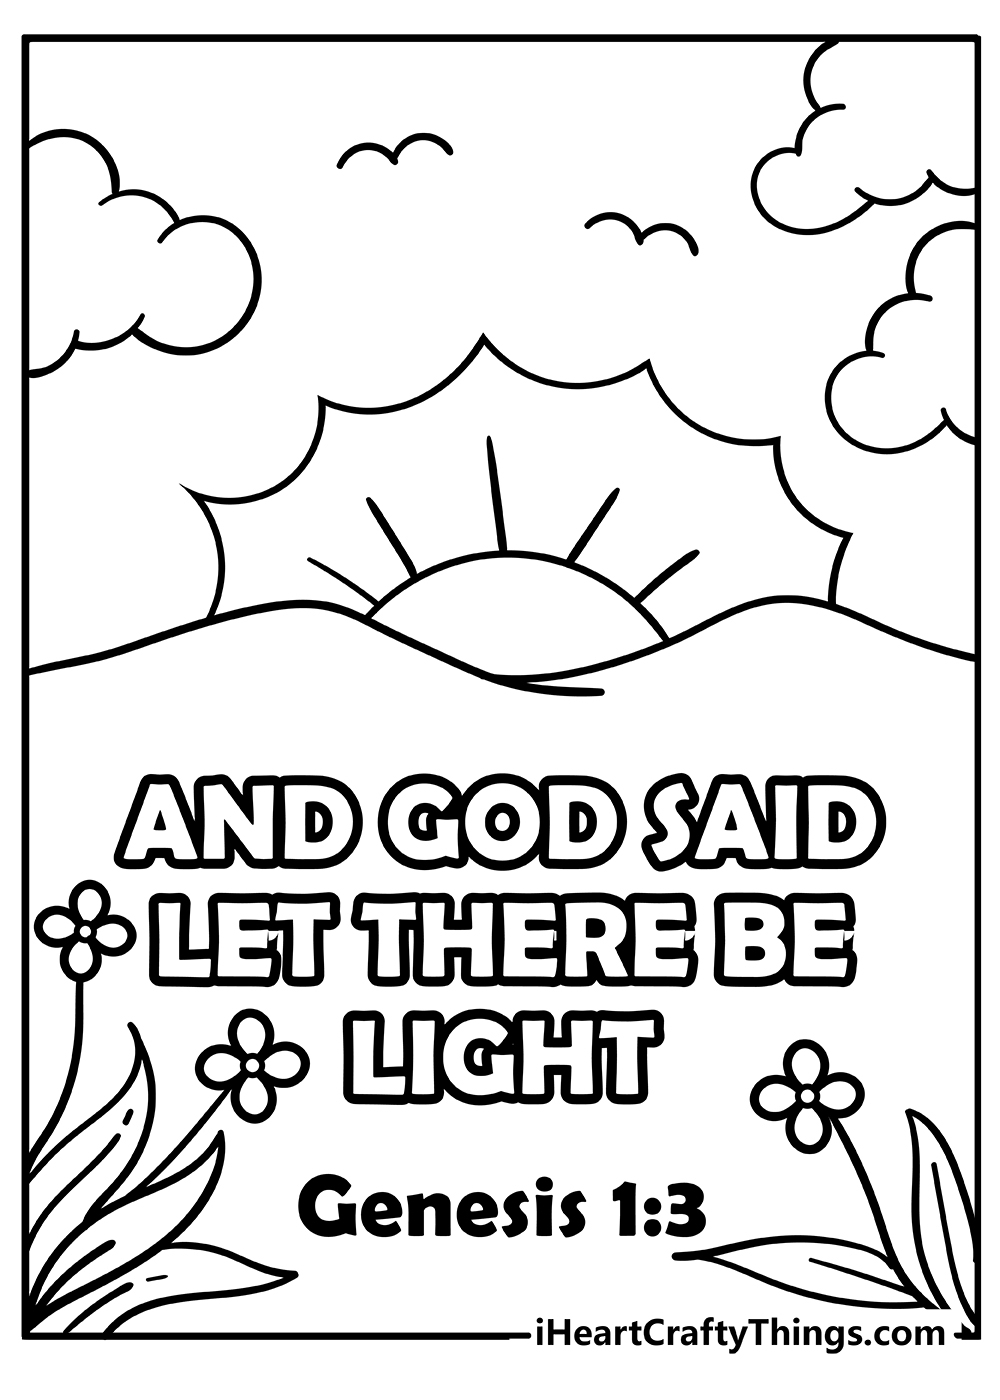 Bible Verse Coloring Pages 100 Free Printables - Free Printable Bible Coloring Pages